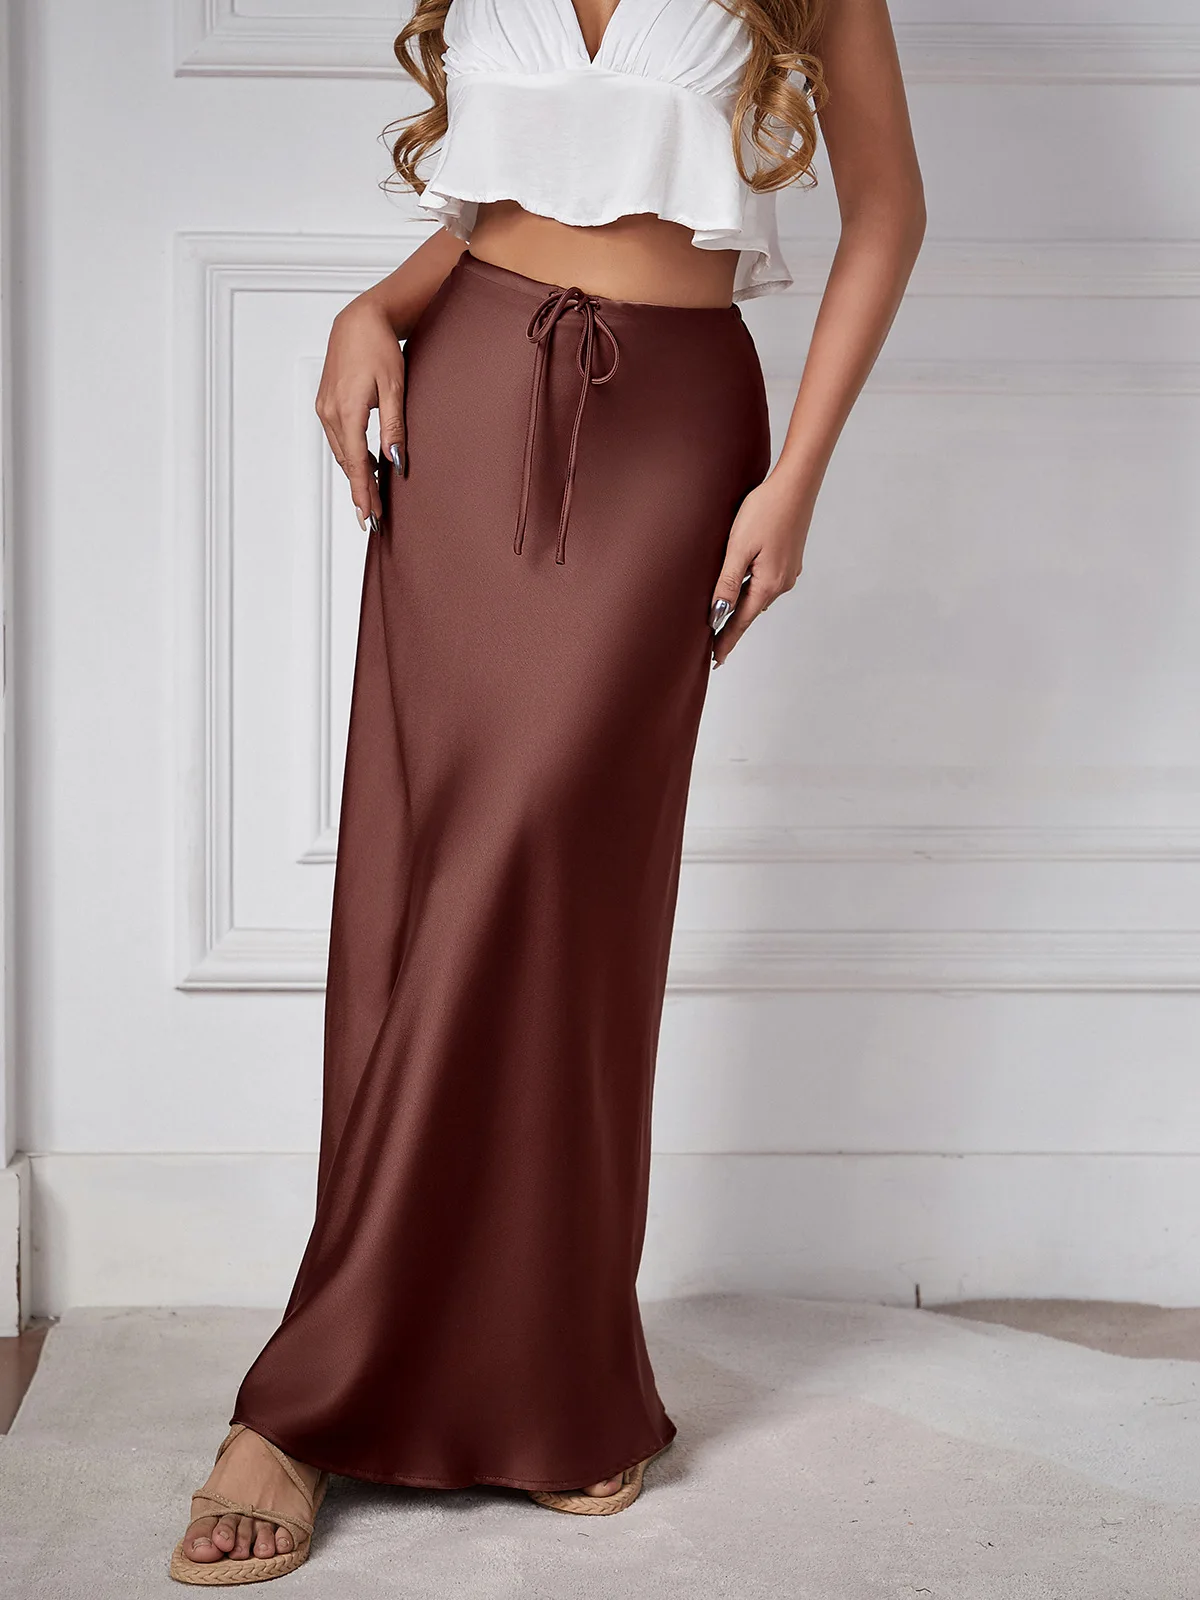 Summer Casual Lace-Up Maxi Skirt For Women Patchwork Slim High Waist Solid Elegant Bandage Pleated Female Long Skirt 2024